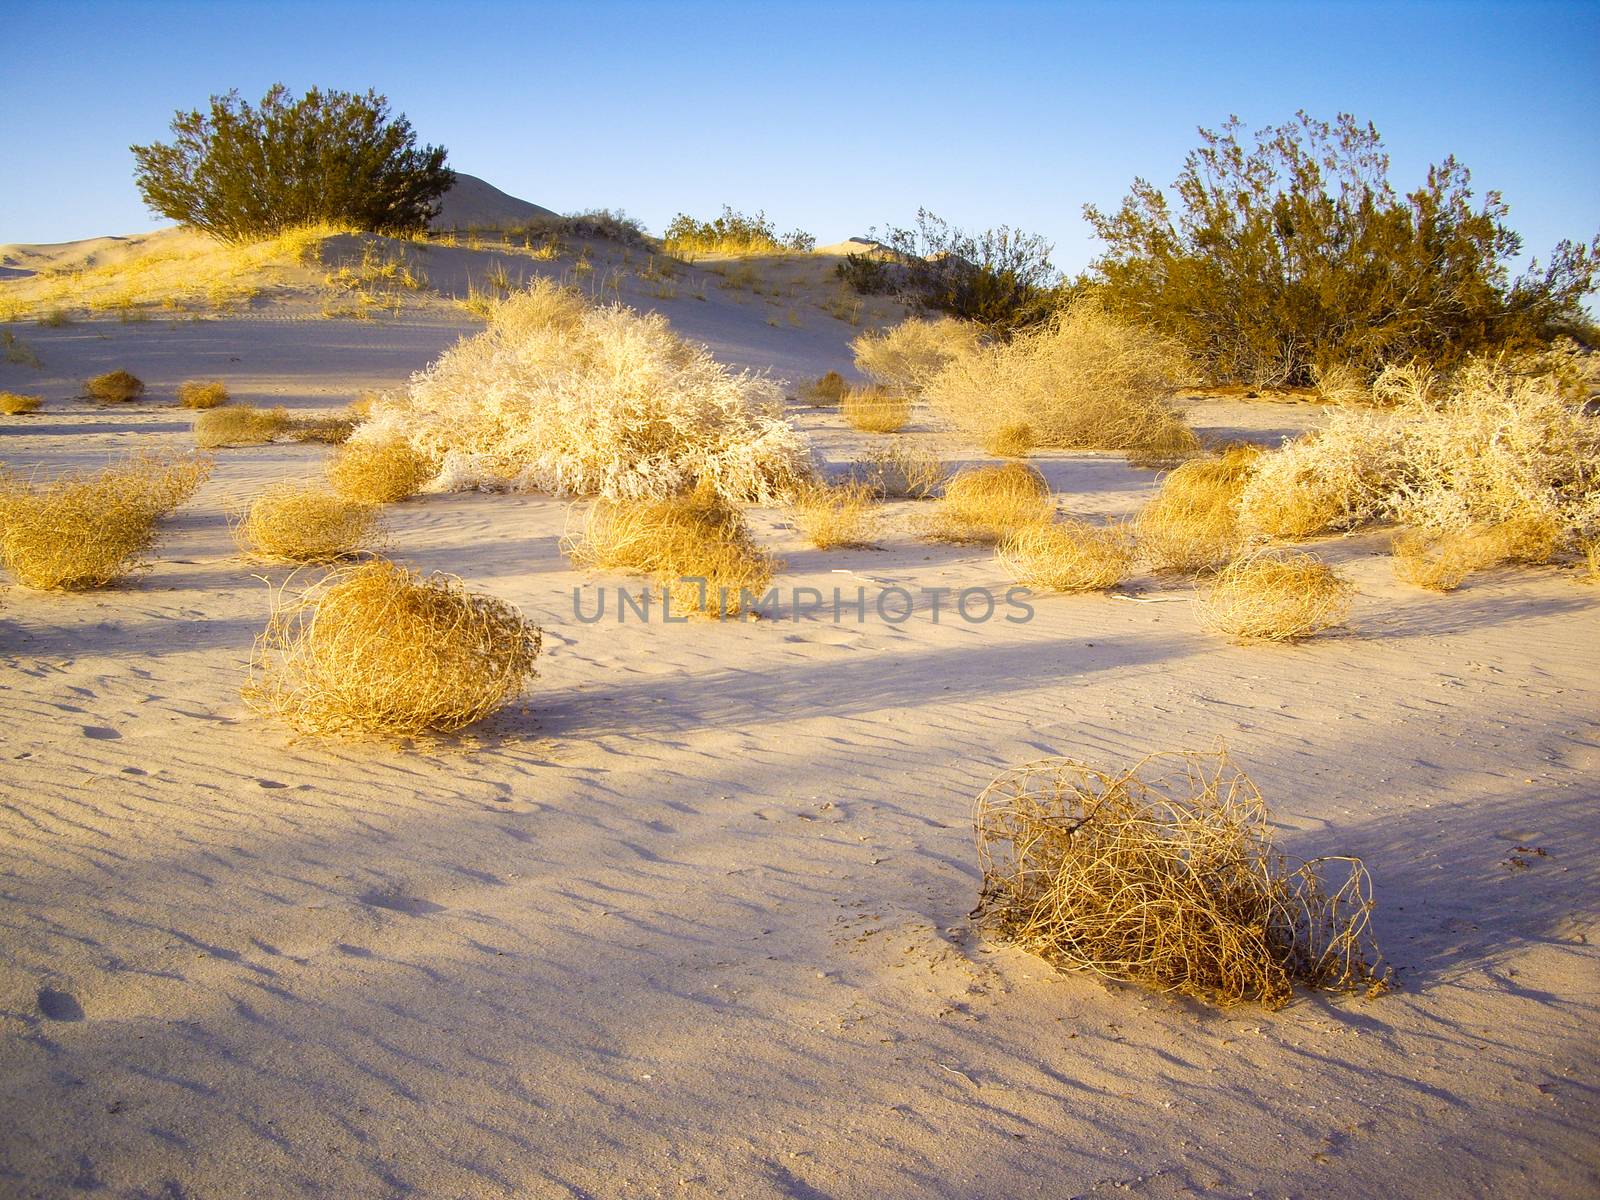 Tumbleweeds in afternoon light